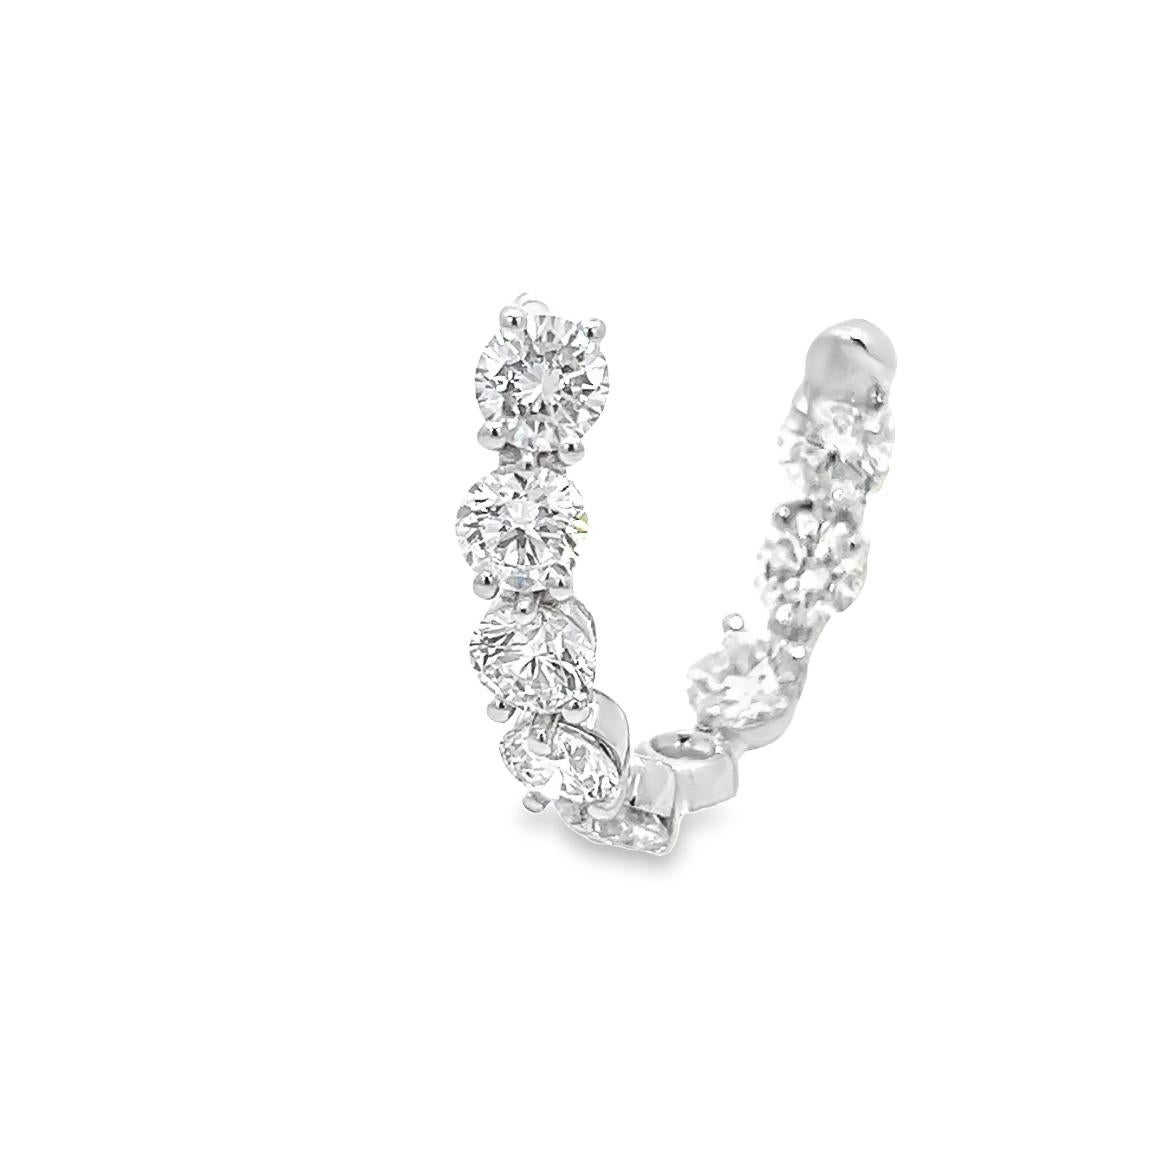 These diamond earrings are unlike anything you've ever seen before. They are the perfect statement piece for those who like to take risks and stand out from the crowd. With a unique and distinct setting, these earrings carry a total of 4.36 carats